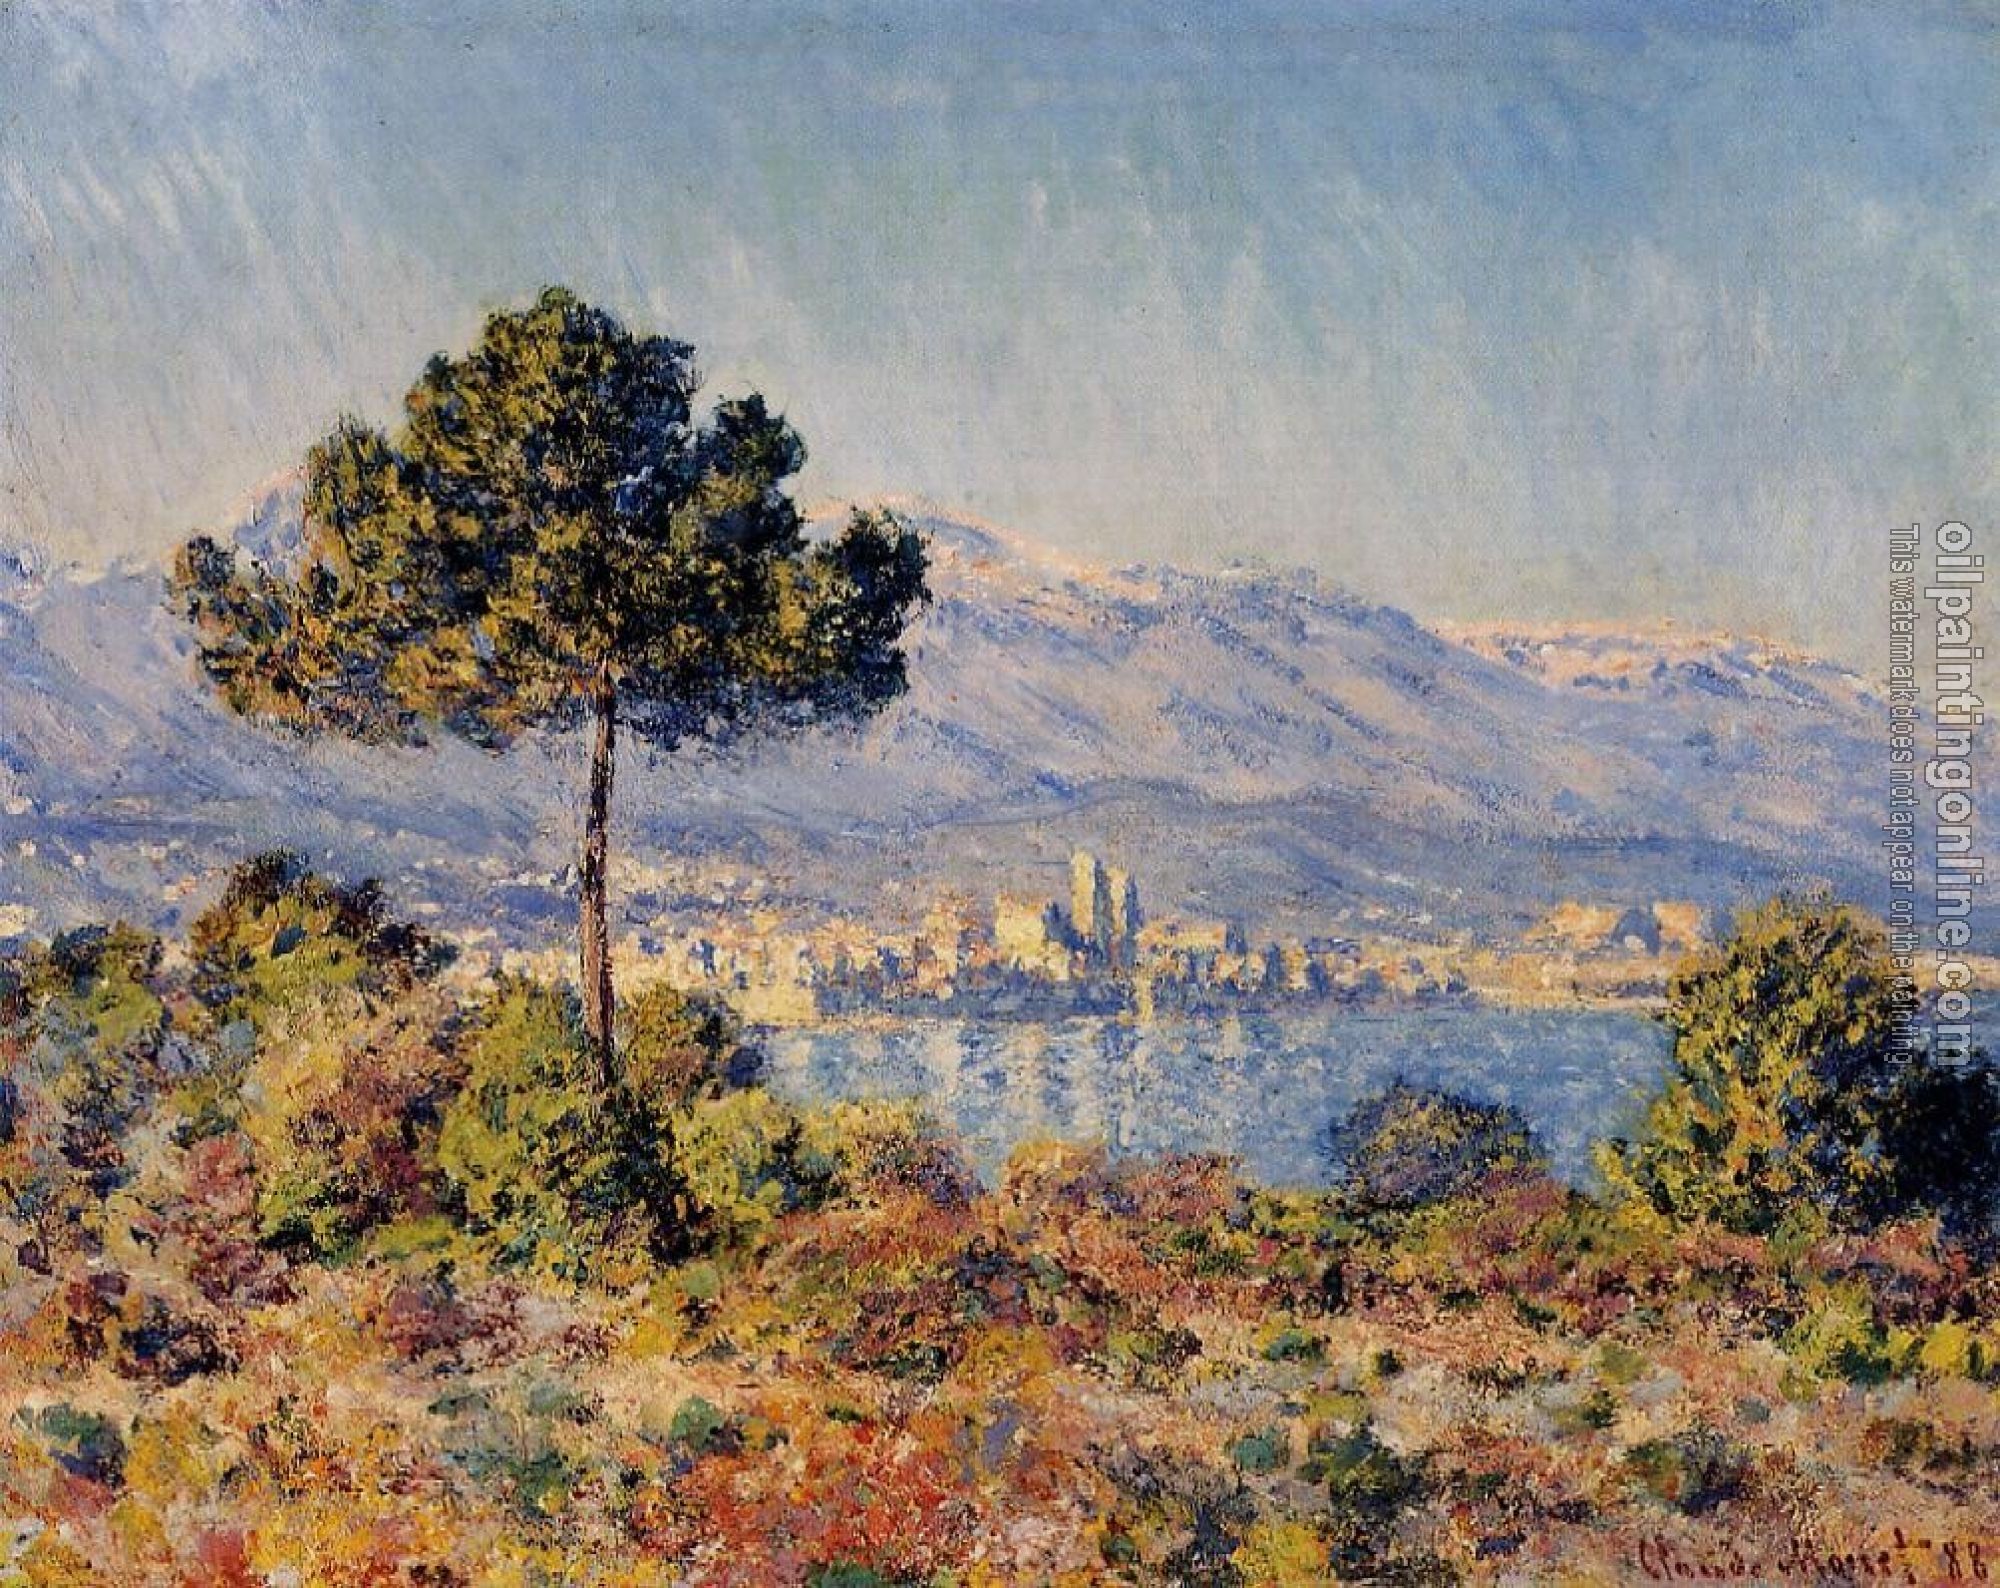 Monet, Claude Oscar - View of Antibes from the Notre-Dame